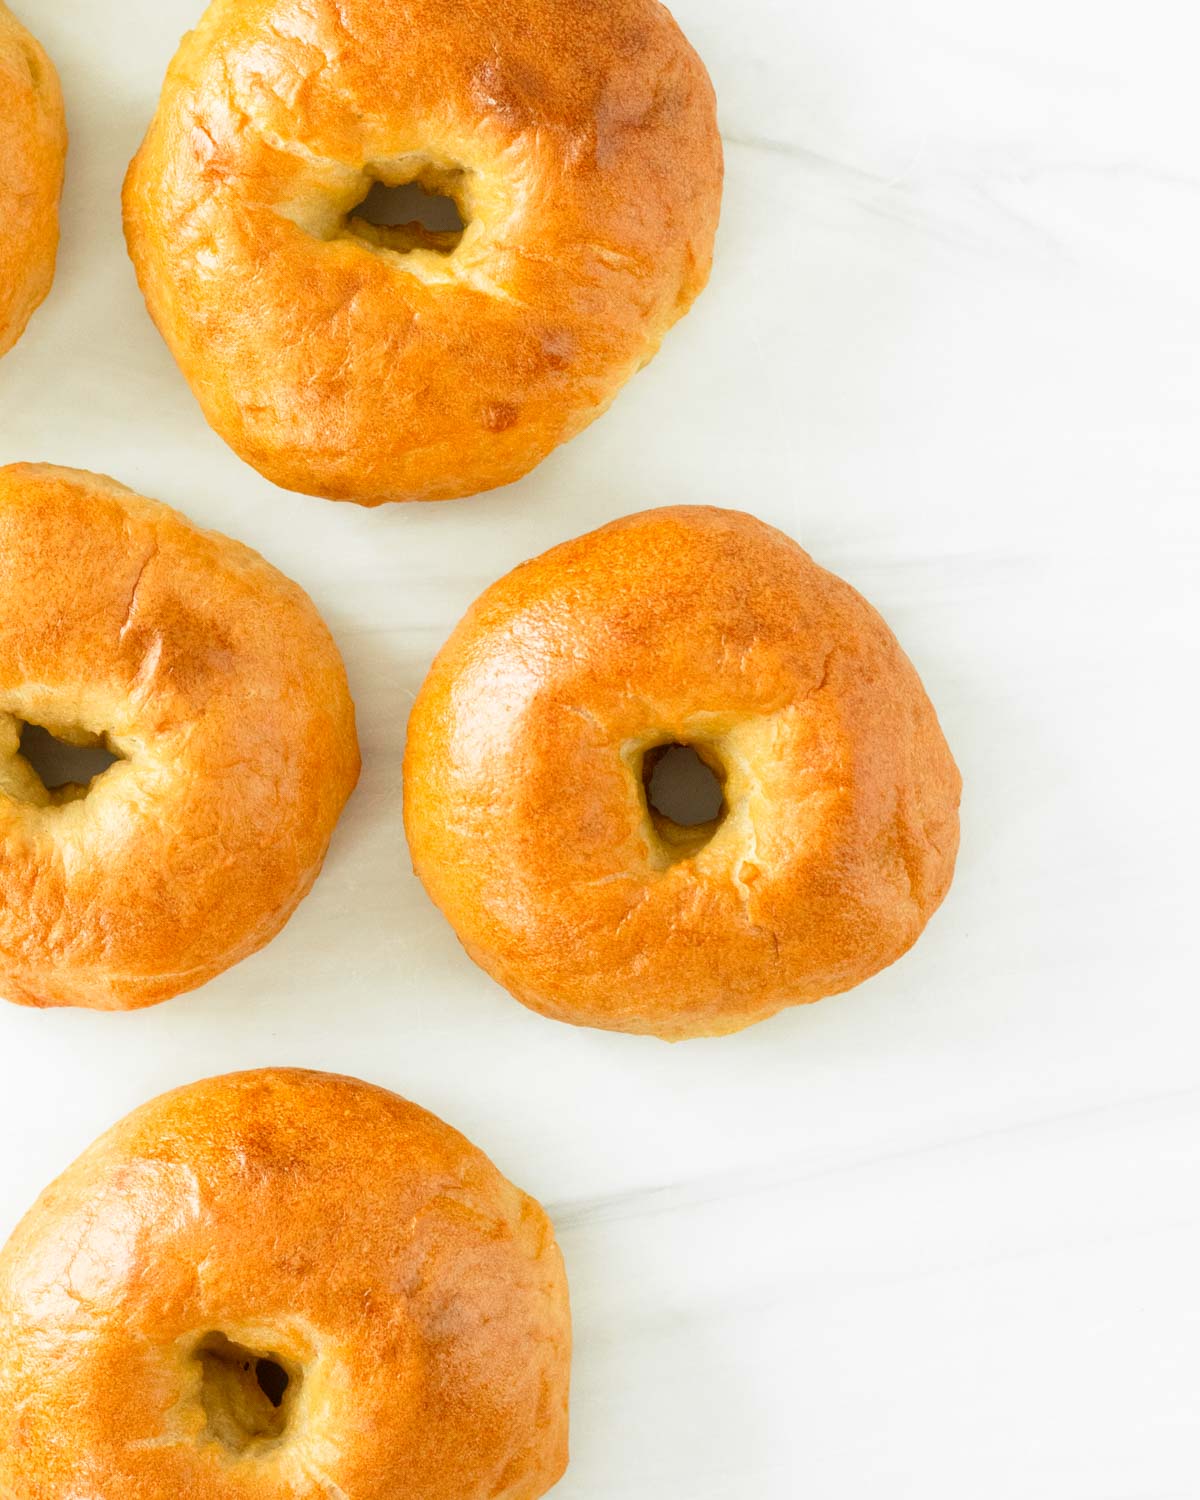 These sourdough bagels are the perfect homemade bagels made with a sourdough starter. These homemade bagels are an easy breakfast recipe and great for storing in the freezer to enjoy later!